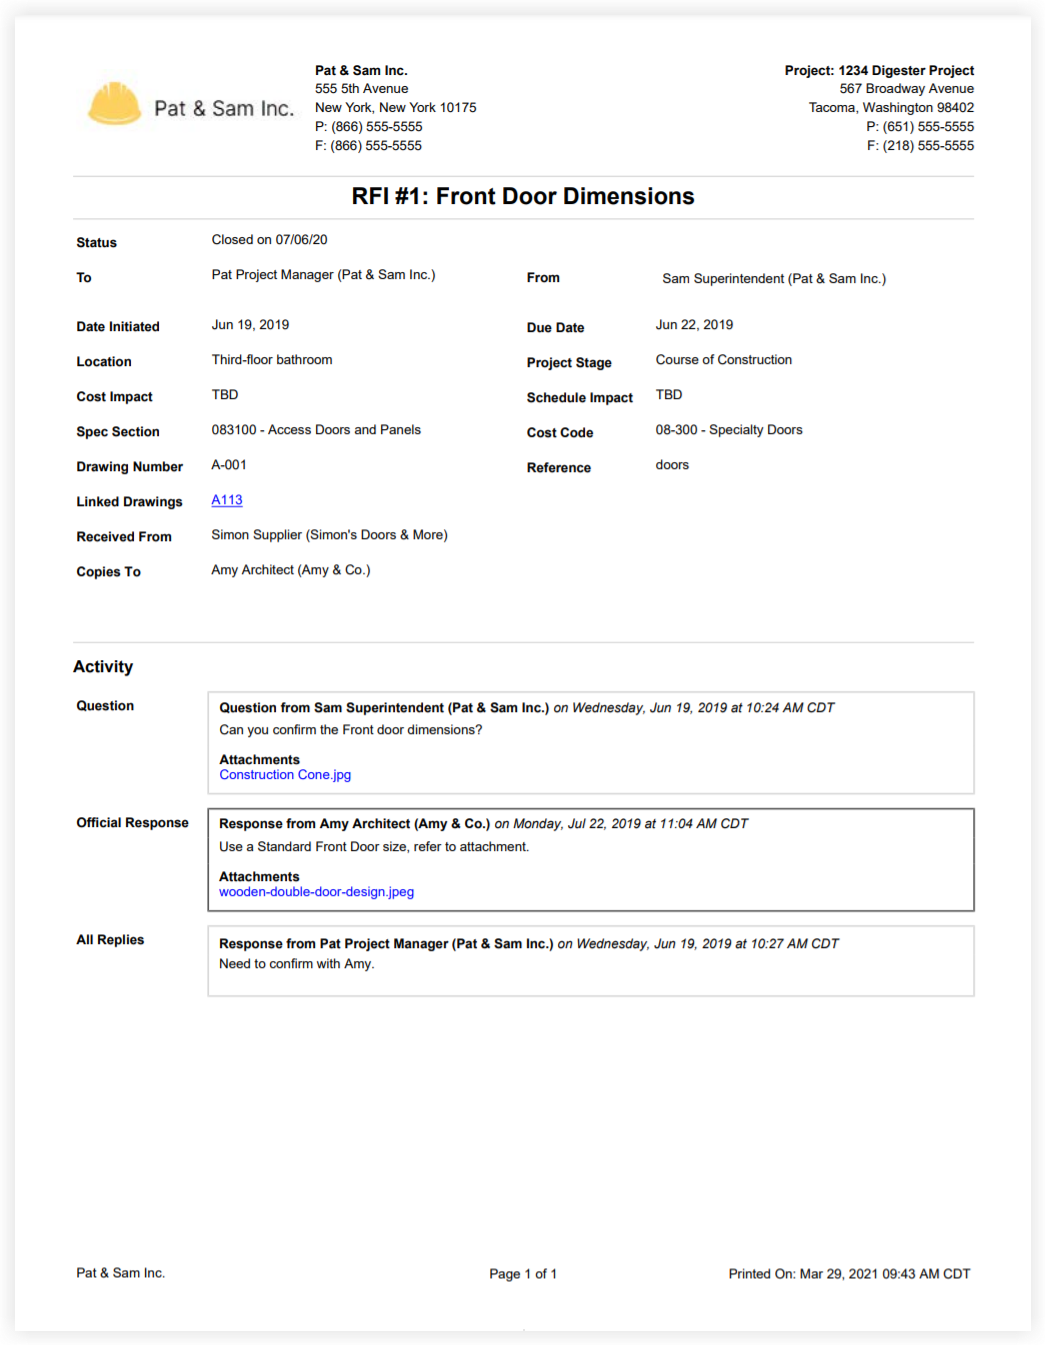 rfi-ann-updated-pdf-export.png